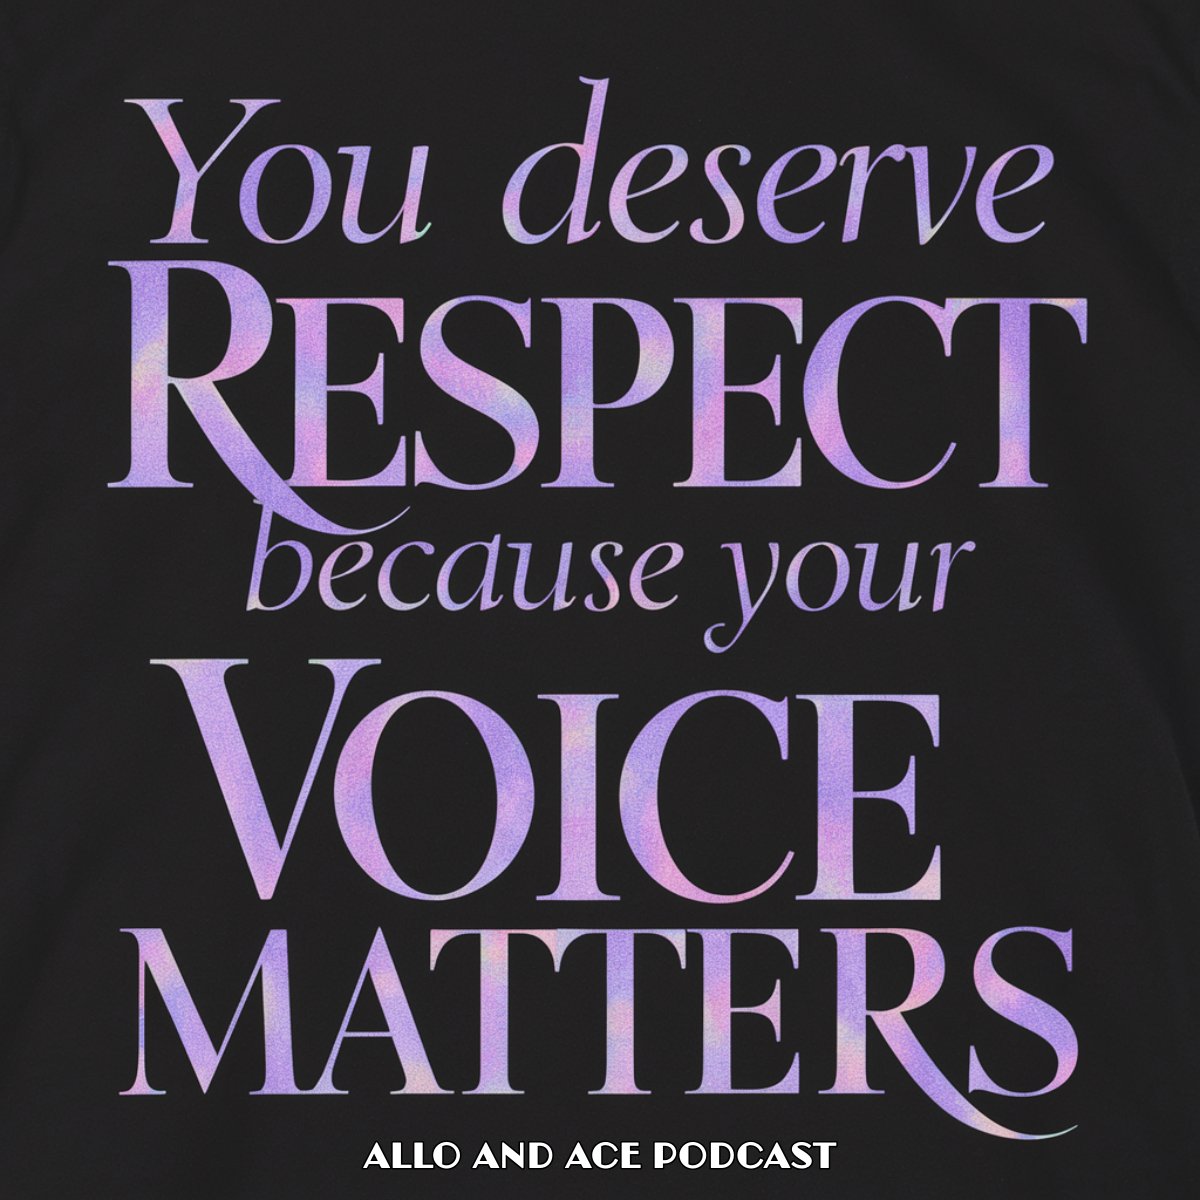 'Your voice is significant, and it deserves to be heard. So, speak your truth, knowing that it matters, and embrace the respect that is rightfully yours.'💜#asexuality #asexual #asexualproblems #asexualpride #asexualityisreal #alloandace #asexualawareness